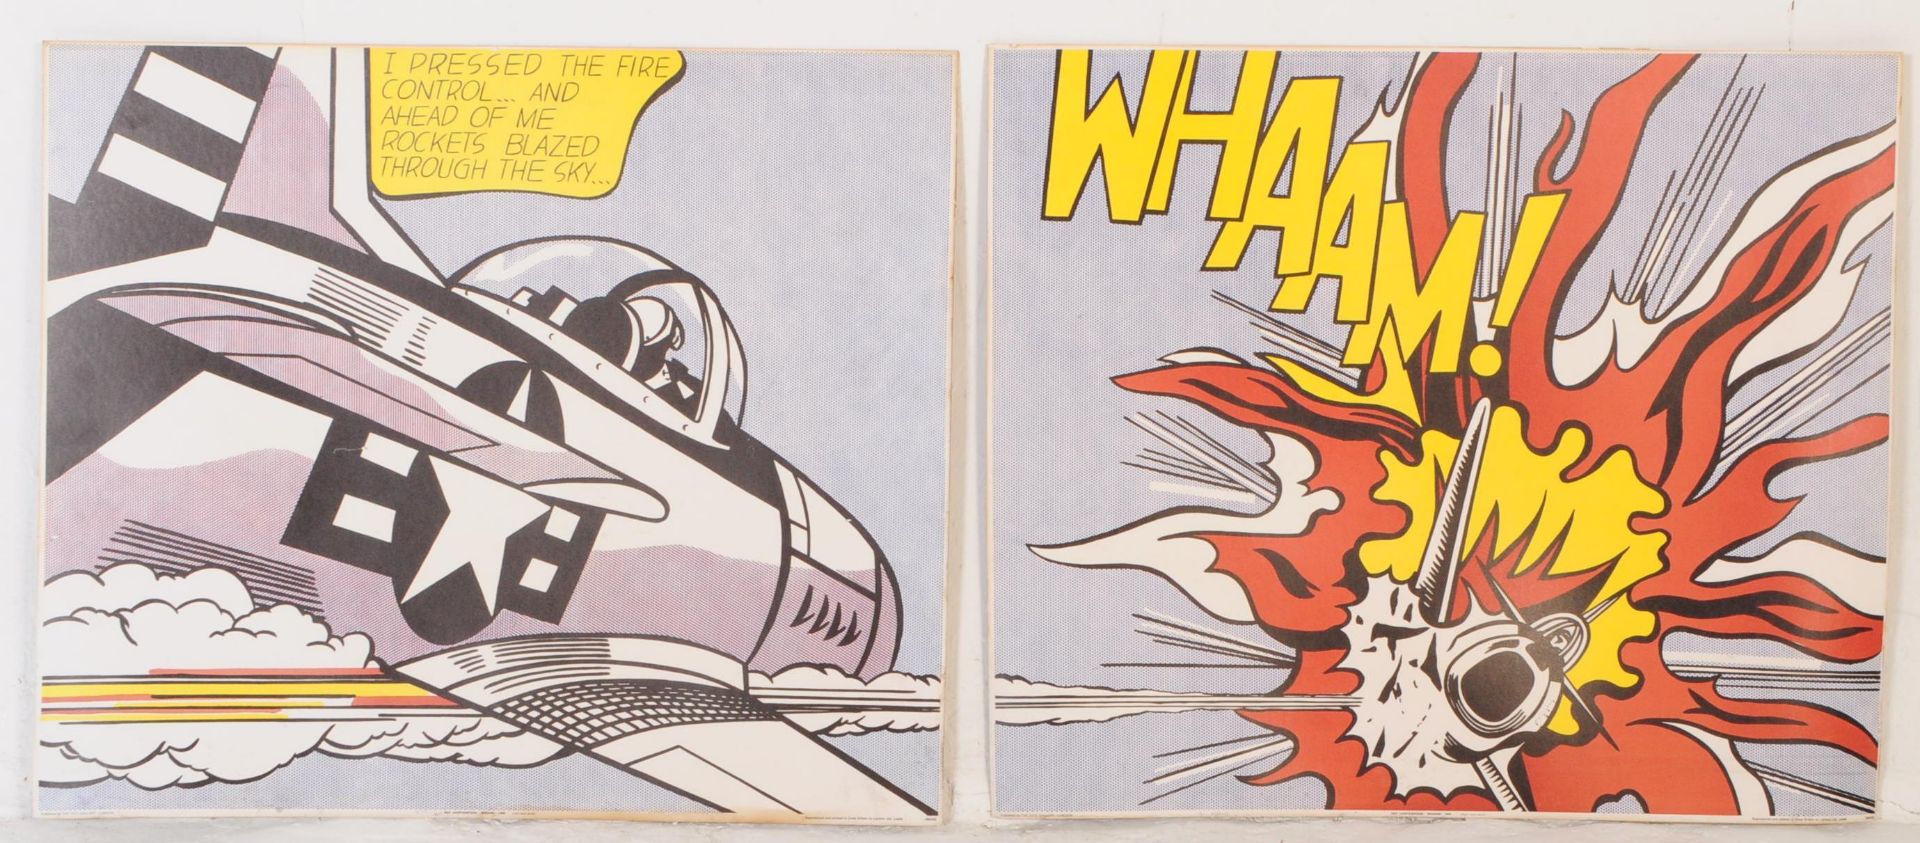 ROY LICHTENSTEIN WHAAM! PRINT - PUBLISHED BY TATE GALLERY - Image 2 of 8